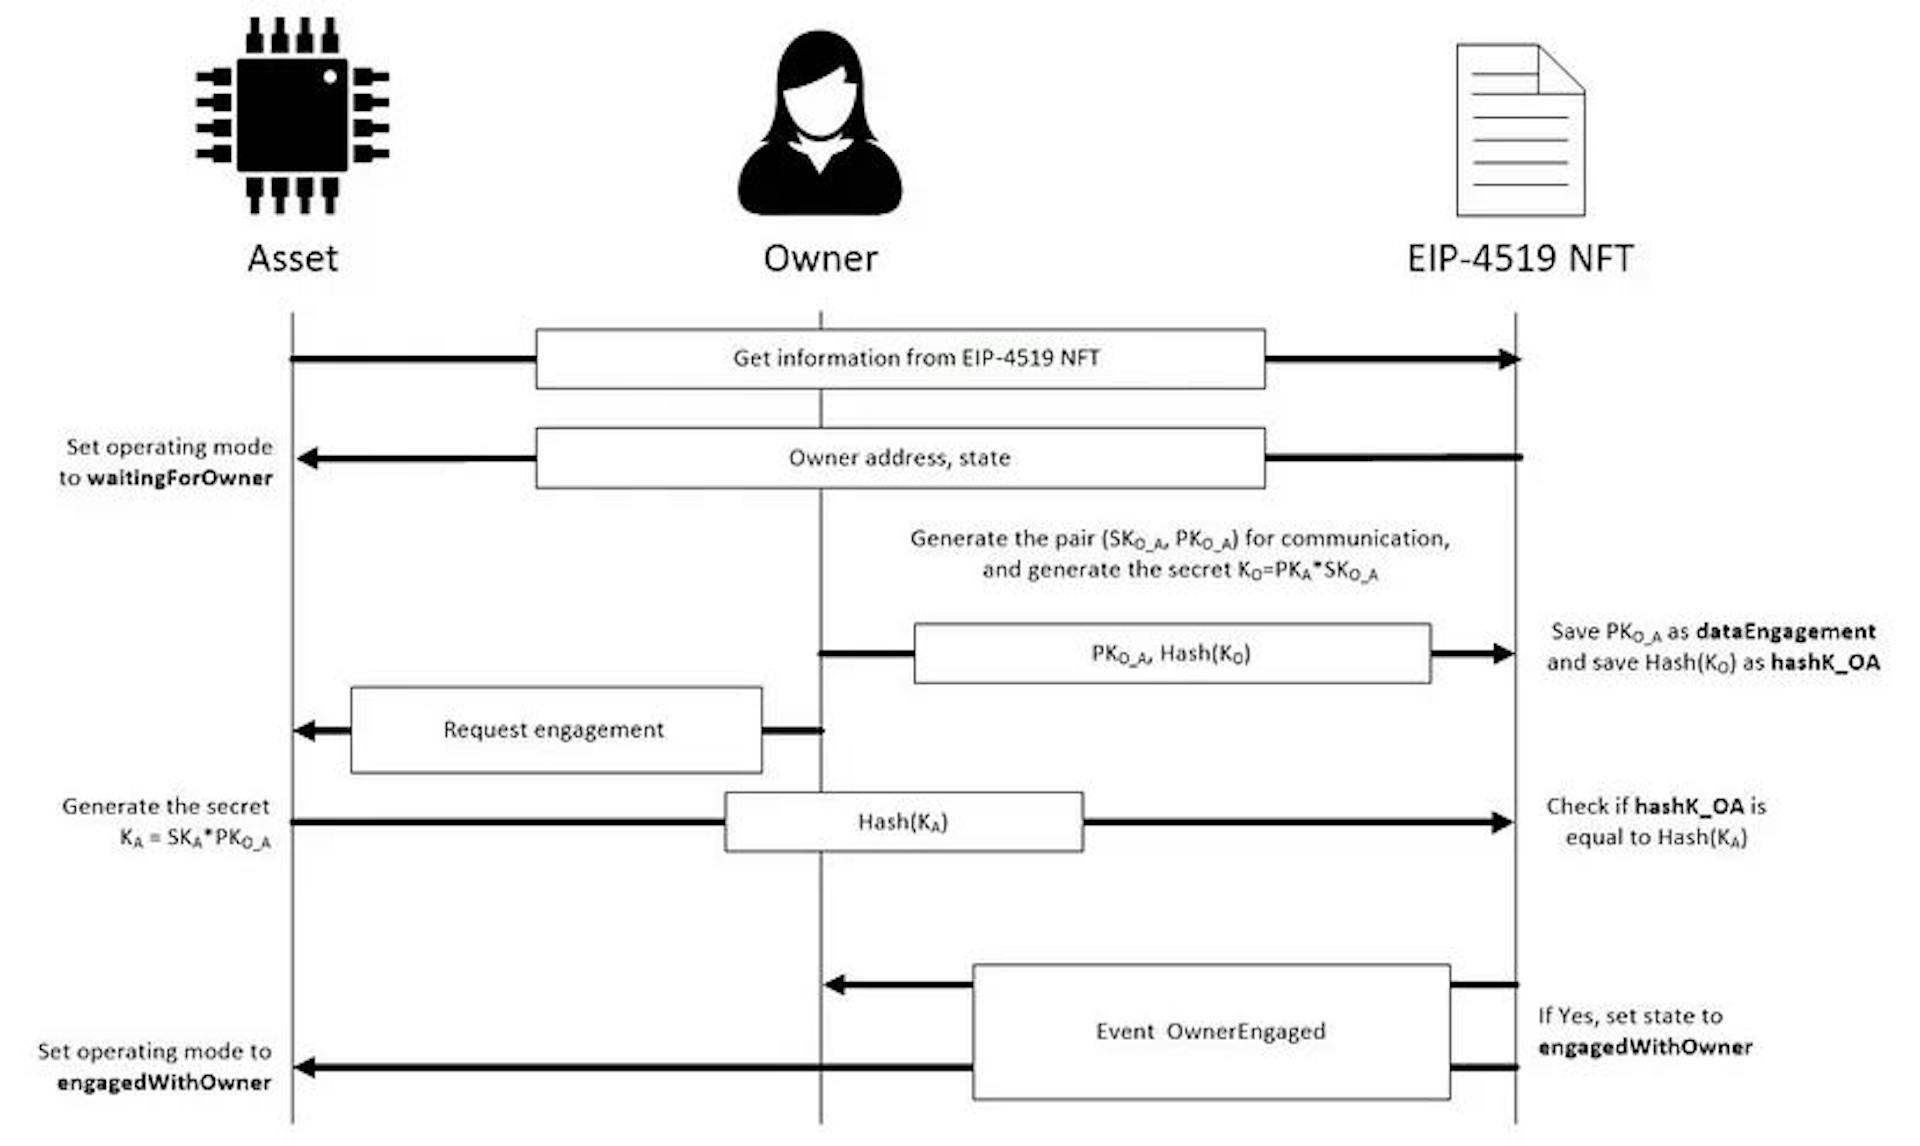 Engagement process between owner and asset from EIP-4519.